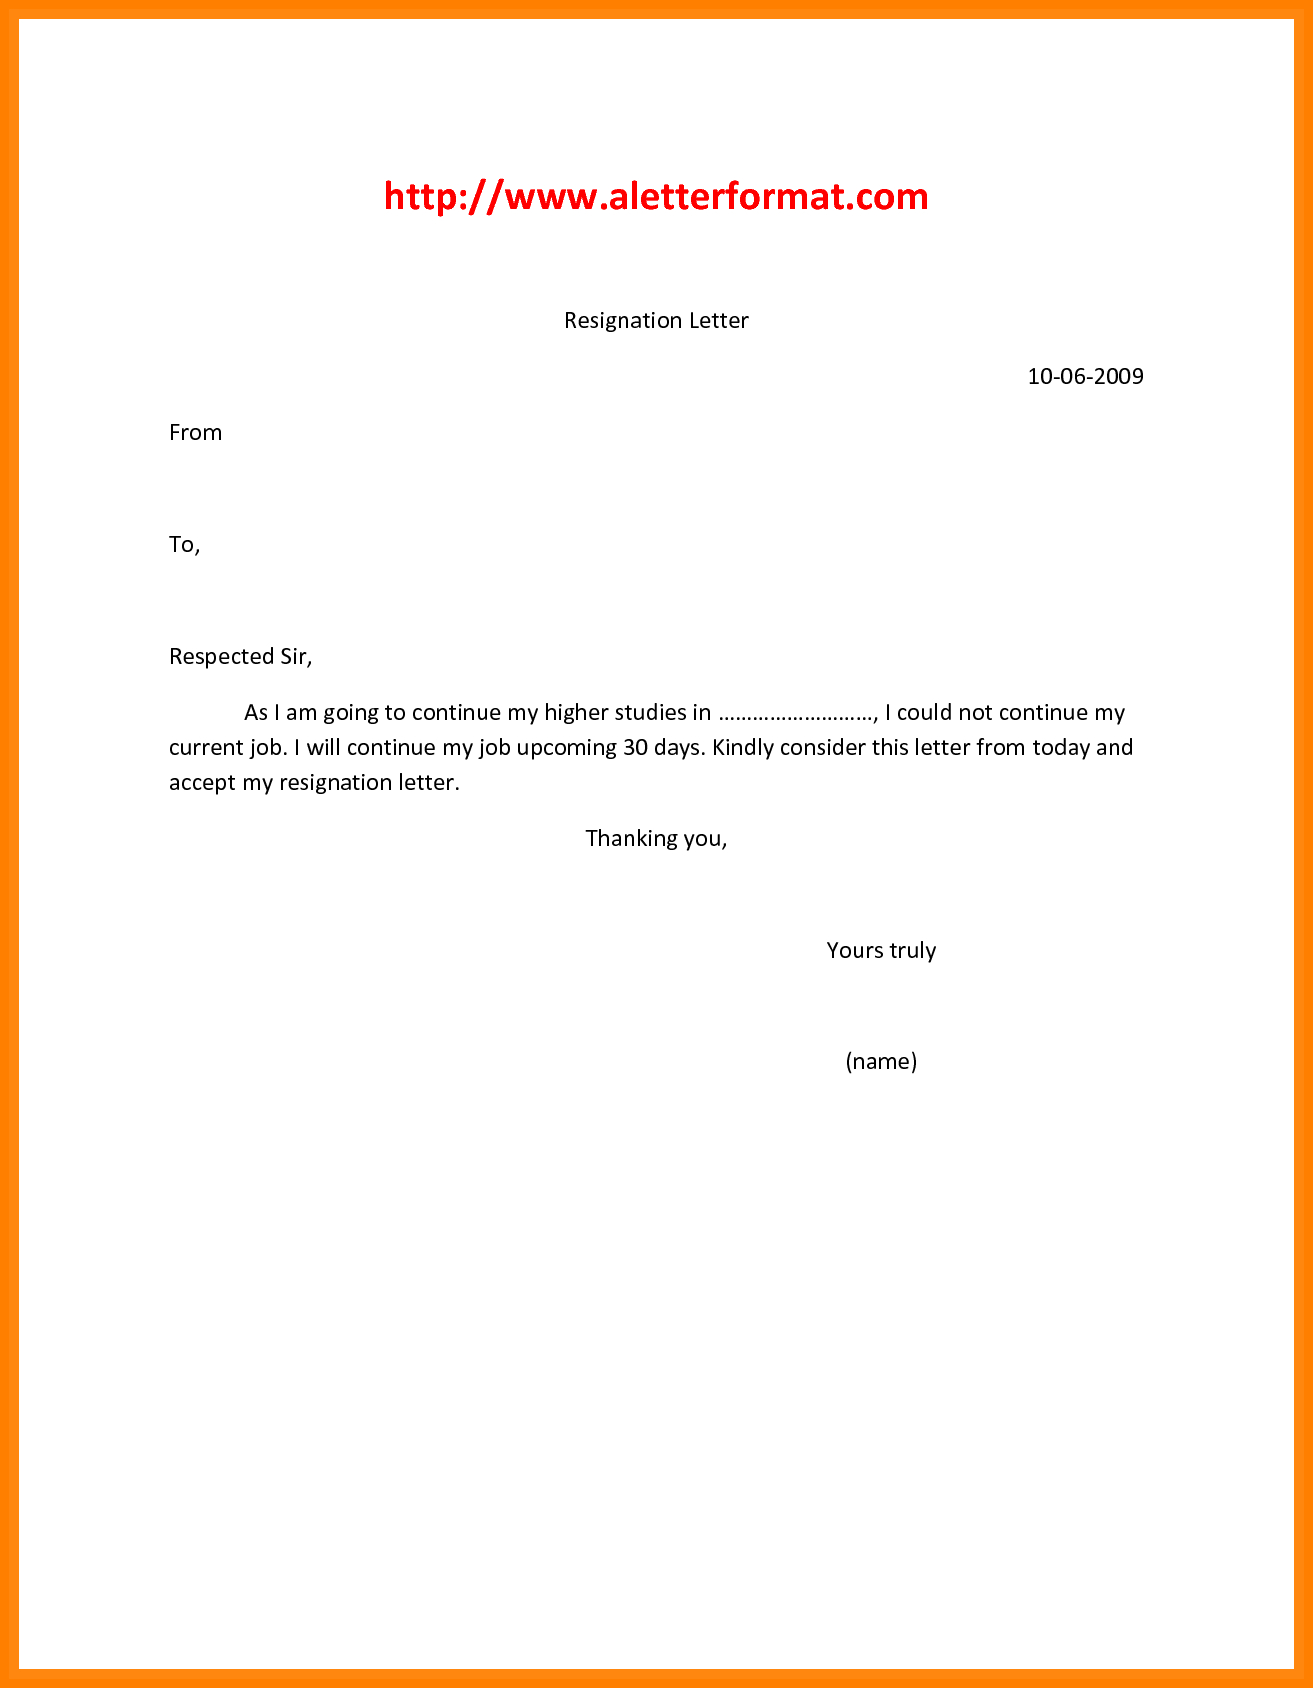 Resignation Letter Template Free Download - Letter for Resignation Pdf Job format Resign Template Free Download